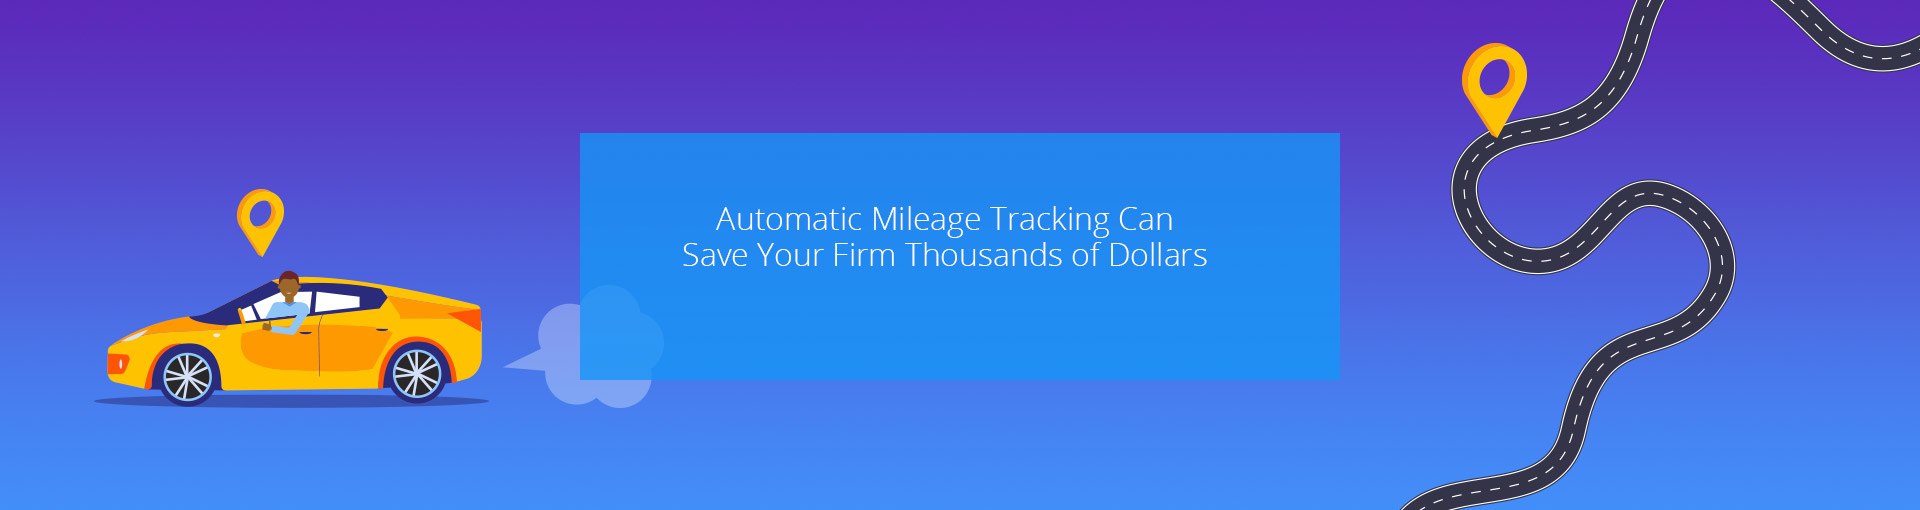 Automatic Mileage Tracking Can Save Your Firm Thousands of Dollars Featured Image